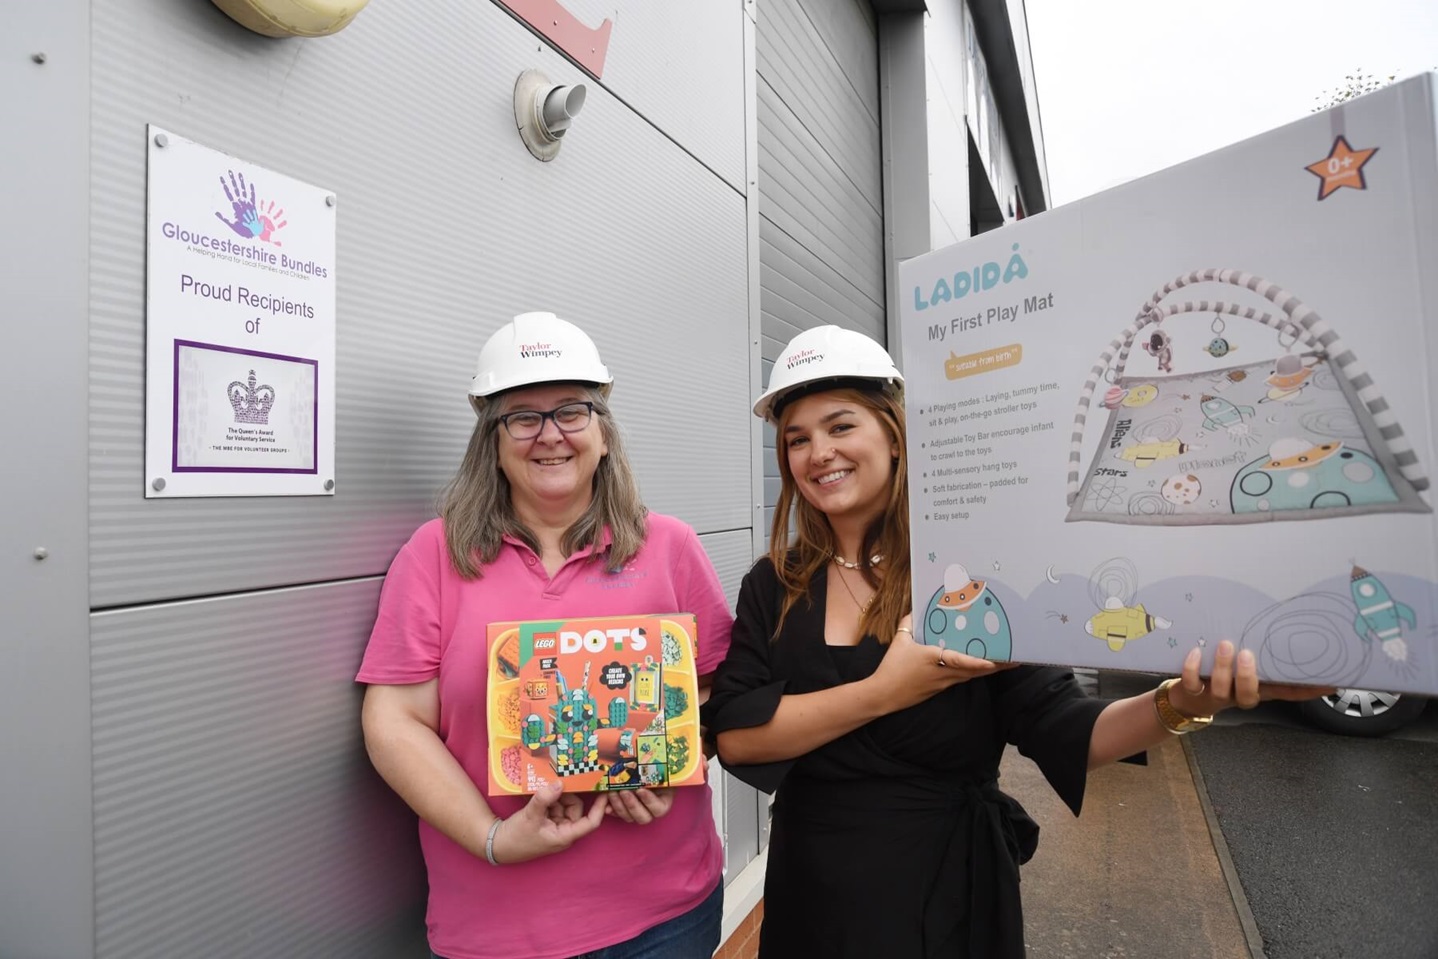 We give Gloucester charity a helping hand ‧ Taylor Wimpey